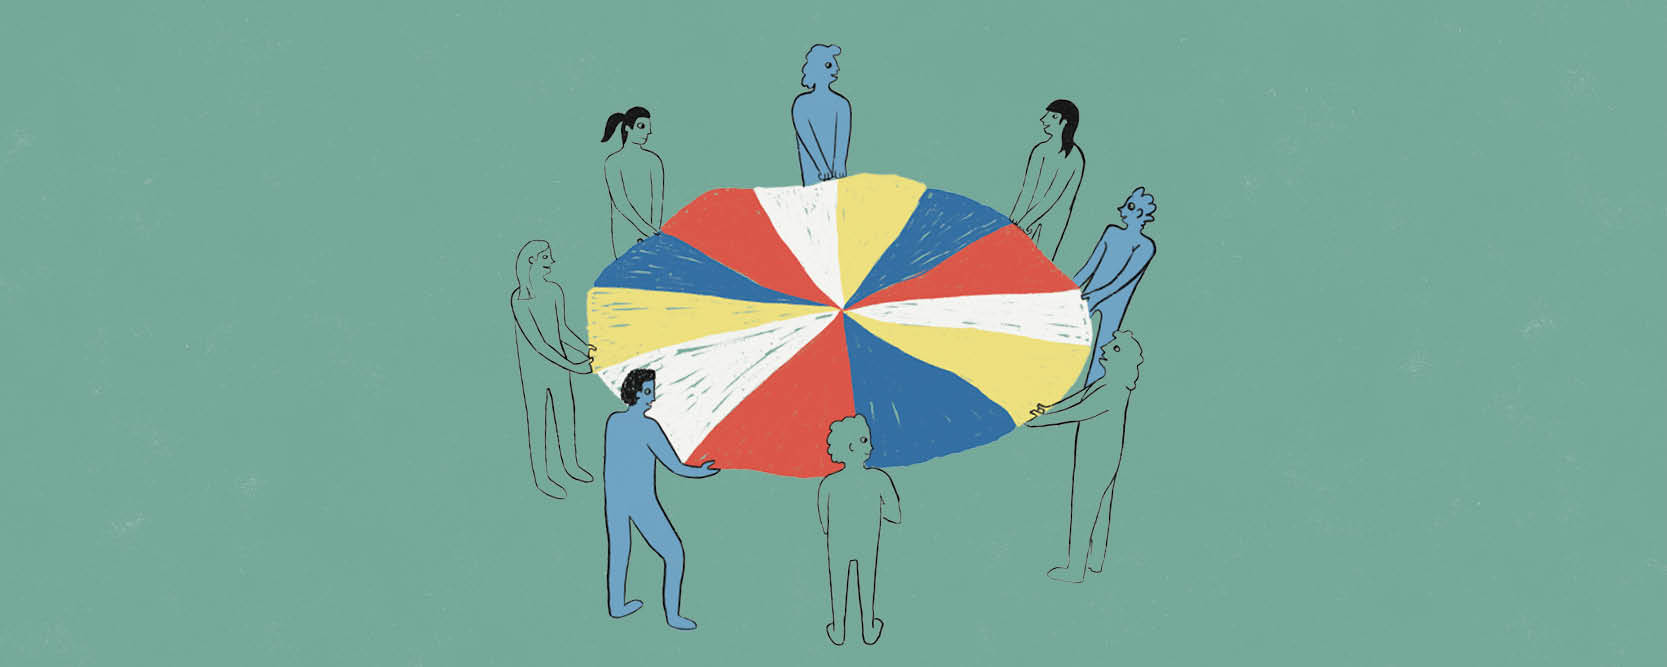 A hand-drawn illustration of people gathered around a multicolored play-parachute.